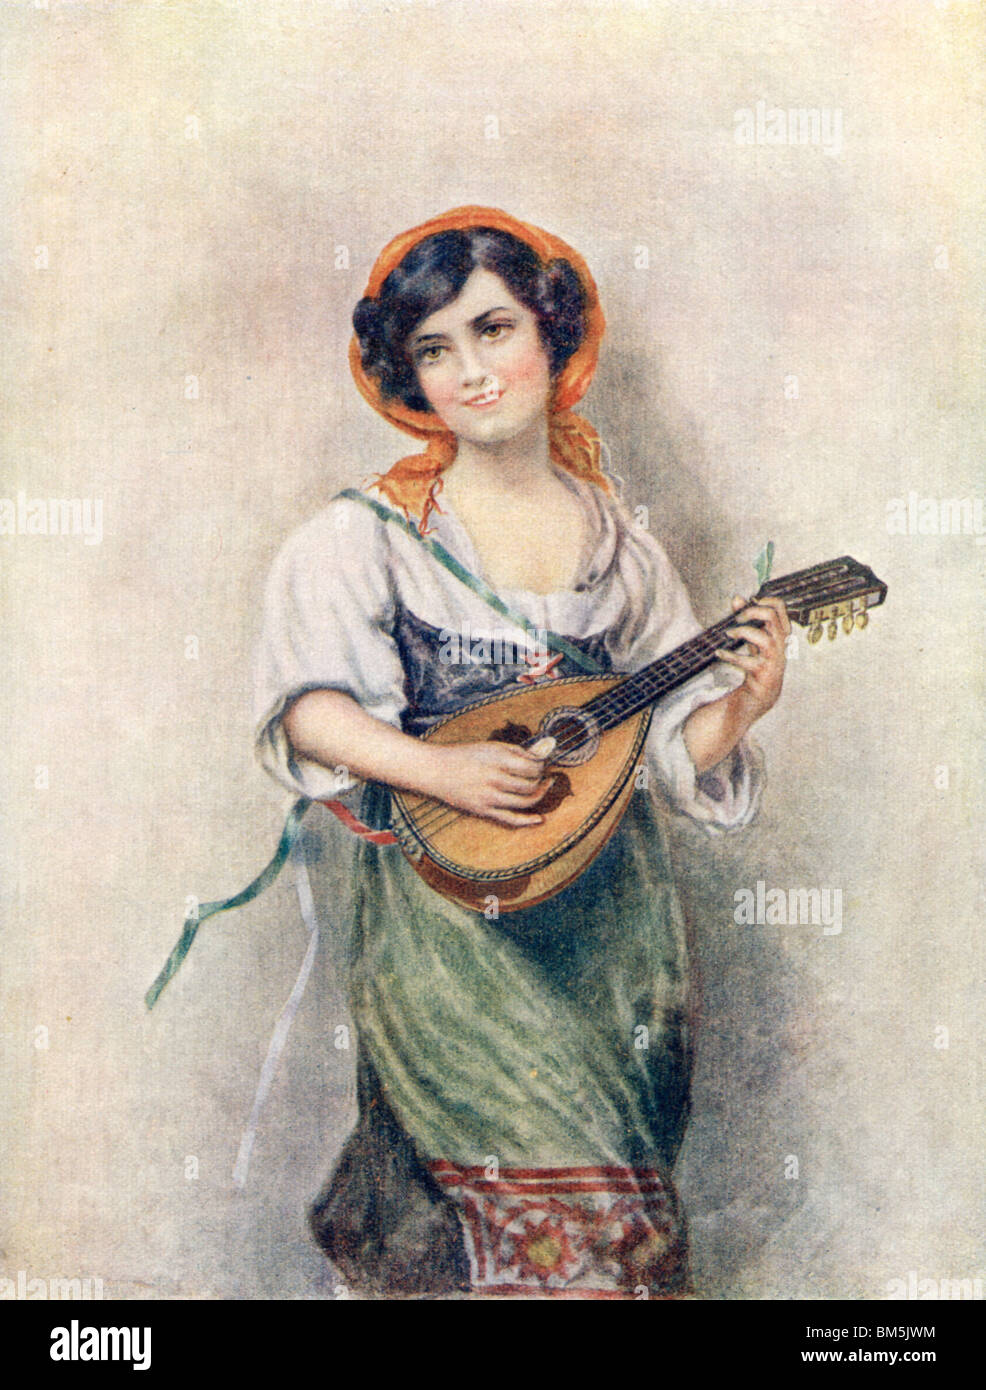 Long Live Italy.  Italian Woman playing the Guitar Stock Photo